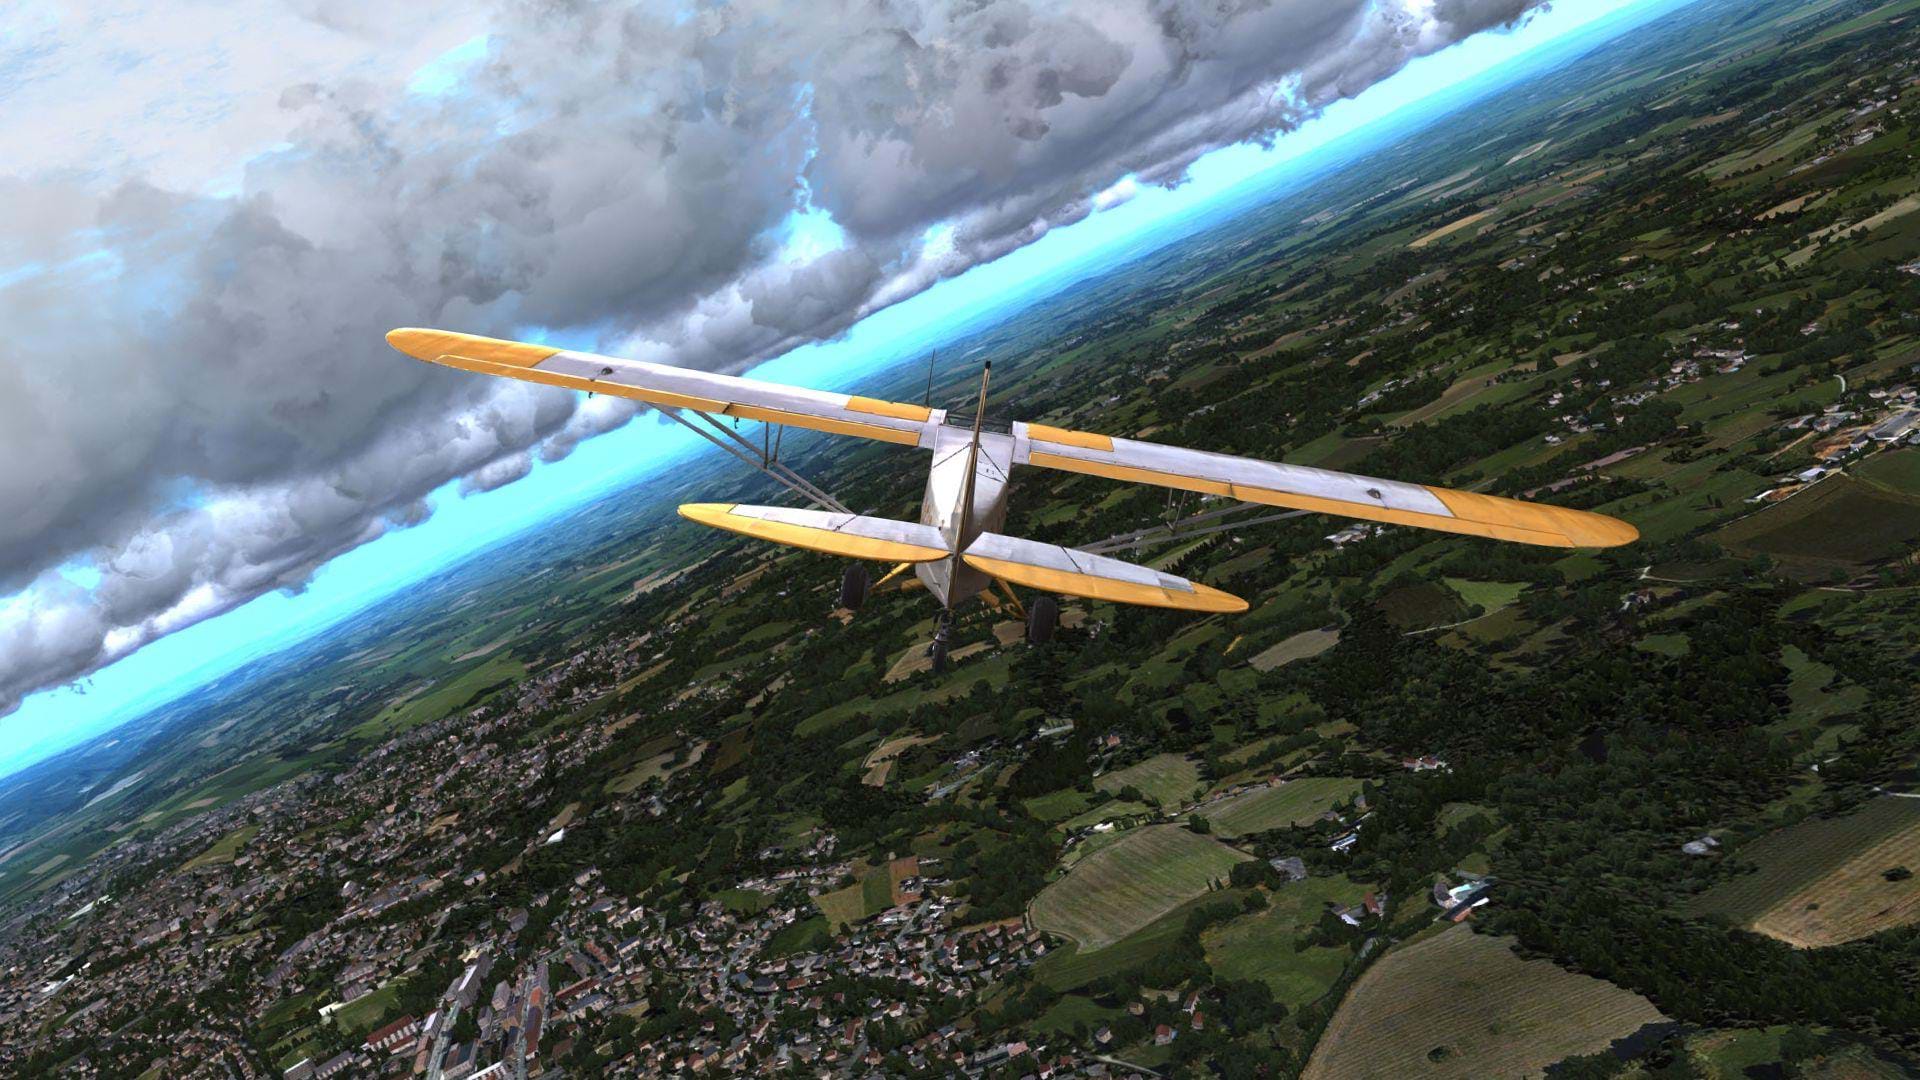 ORBX and Dovetail Games will be working on the new simulation titles